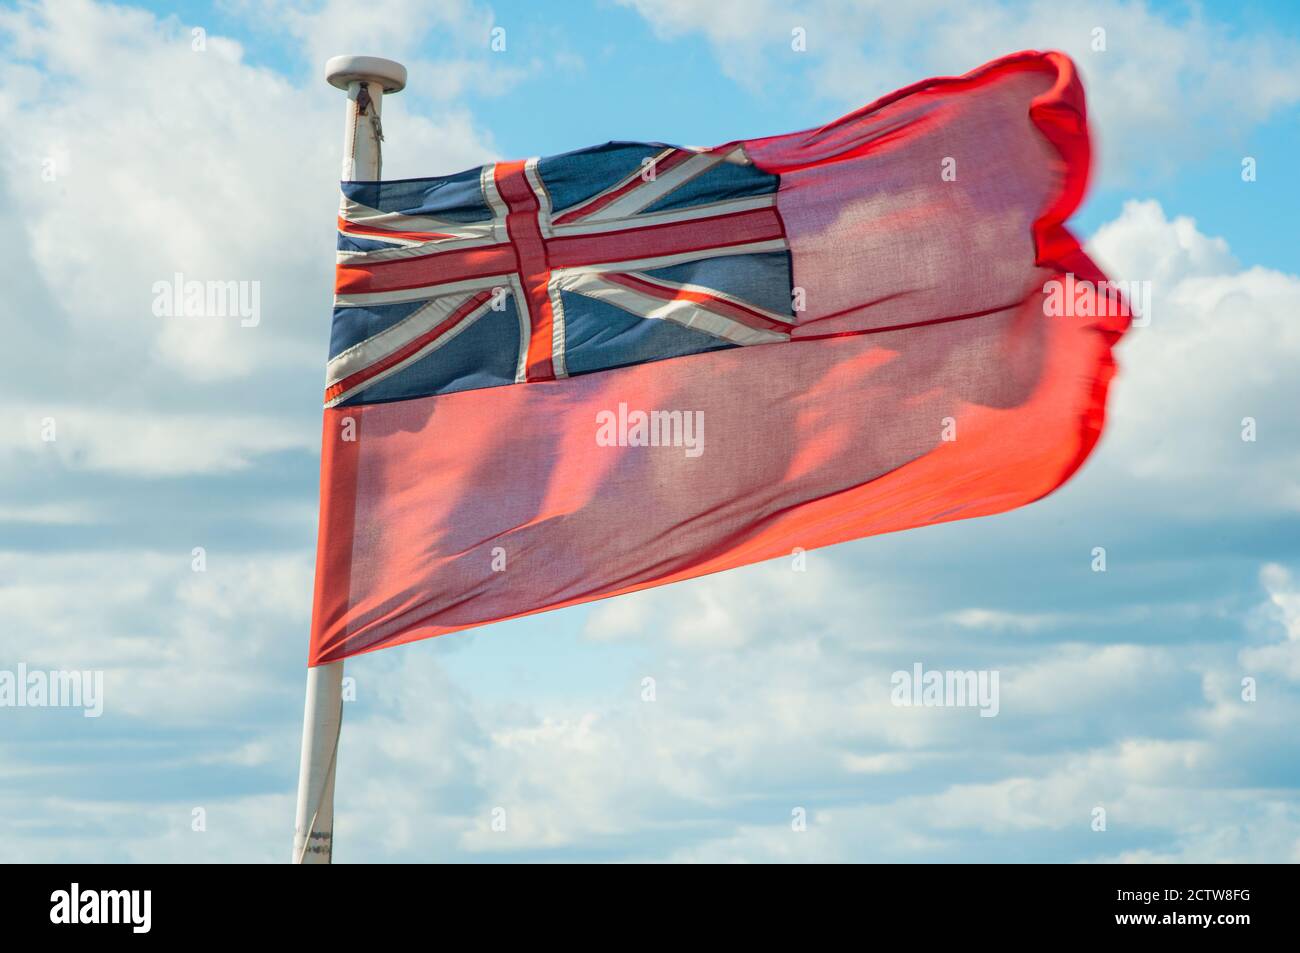 Red Ensign, British flag flying on a ships flag pole Stock Photo